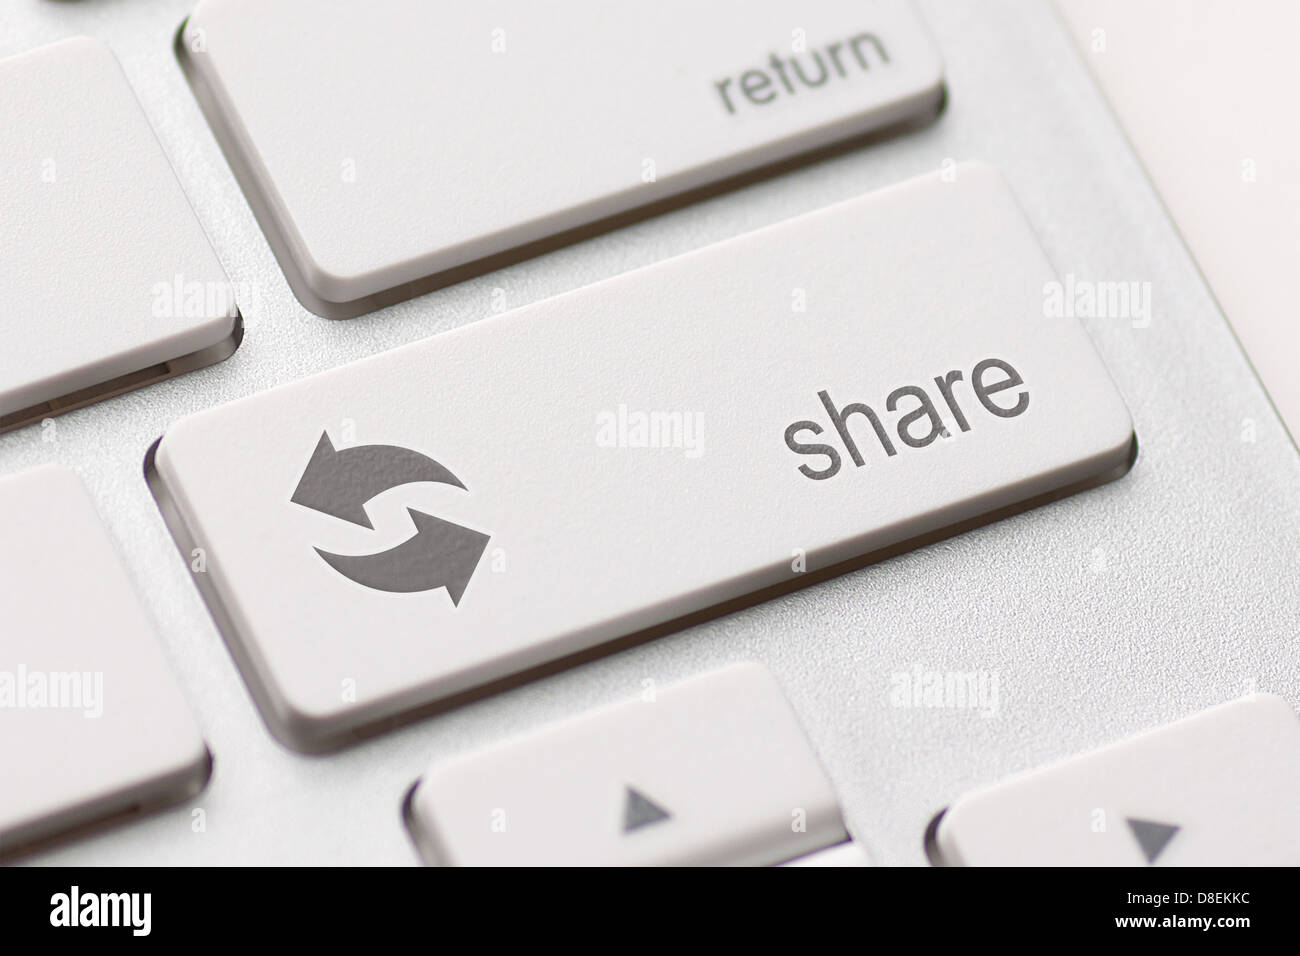 computer concepts, share button key Stock Photo